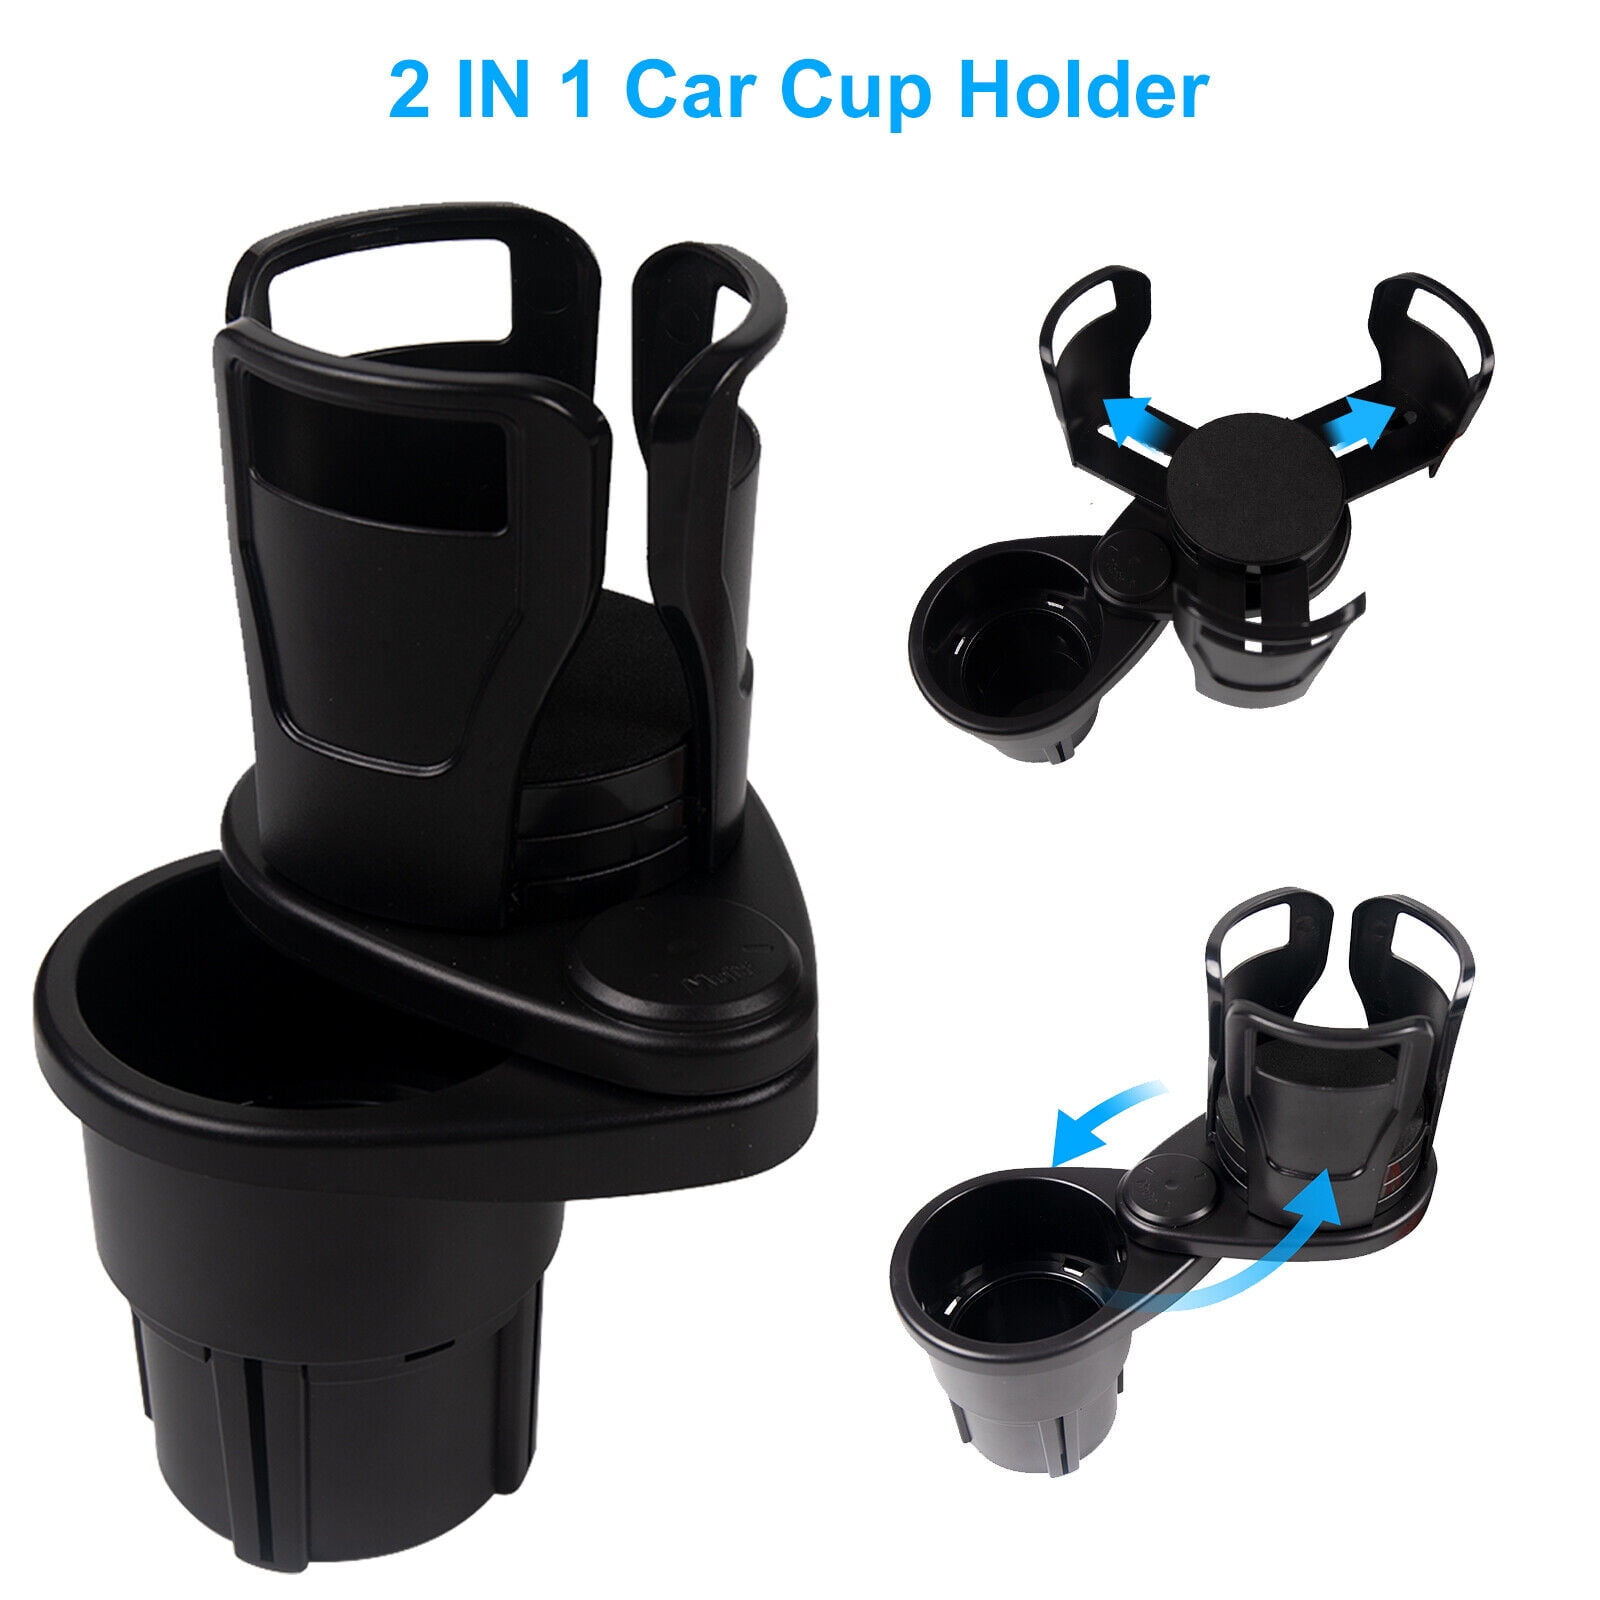  OFY 3 in 1 Car Cup Holder Expander with Adjustable Base,  [Upgraded Expandable Cup Holder] All Purpose Cup Holder and Organizer, Road  Trip Essentials Car Accessories for Snack Bottles Cups Drinks 